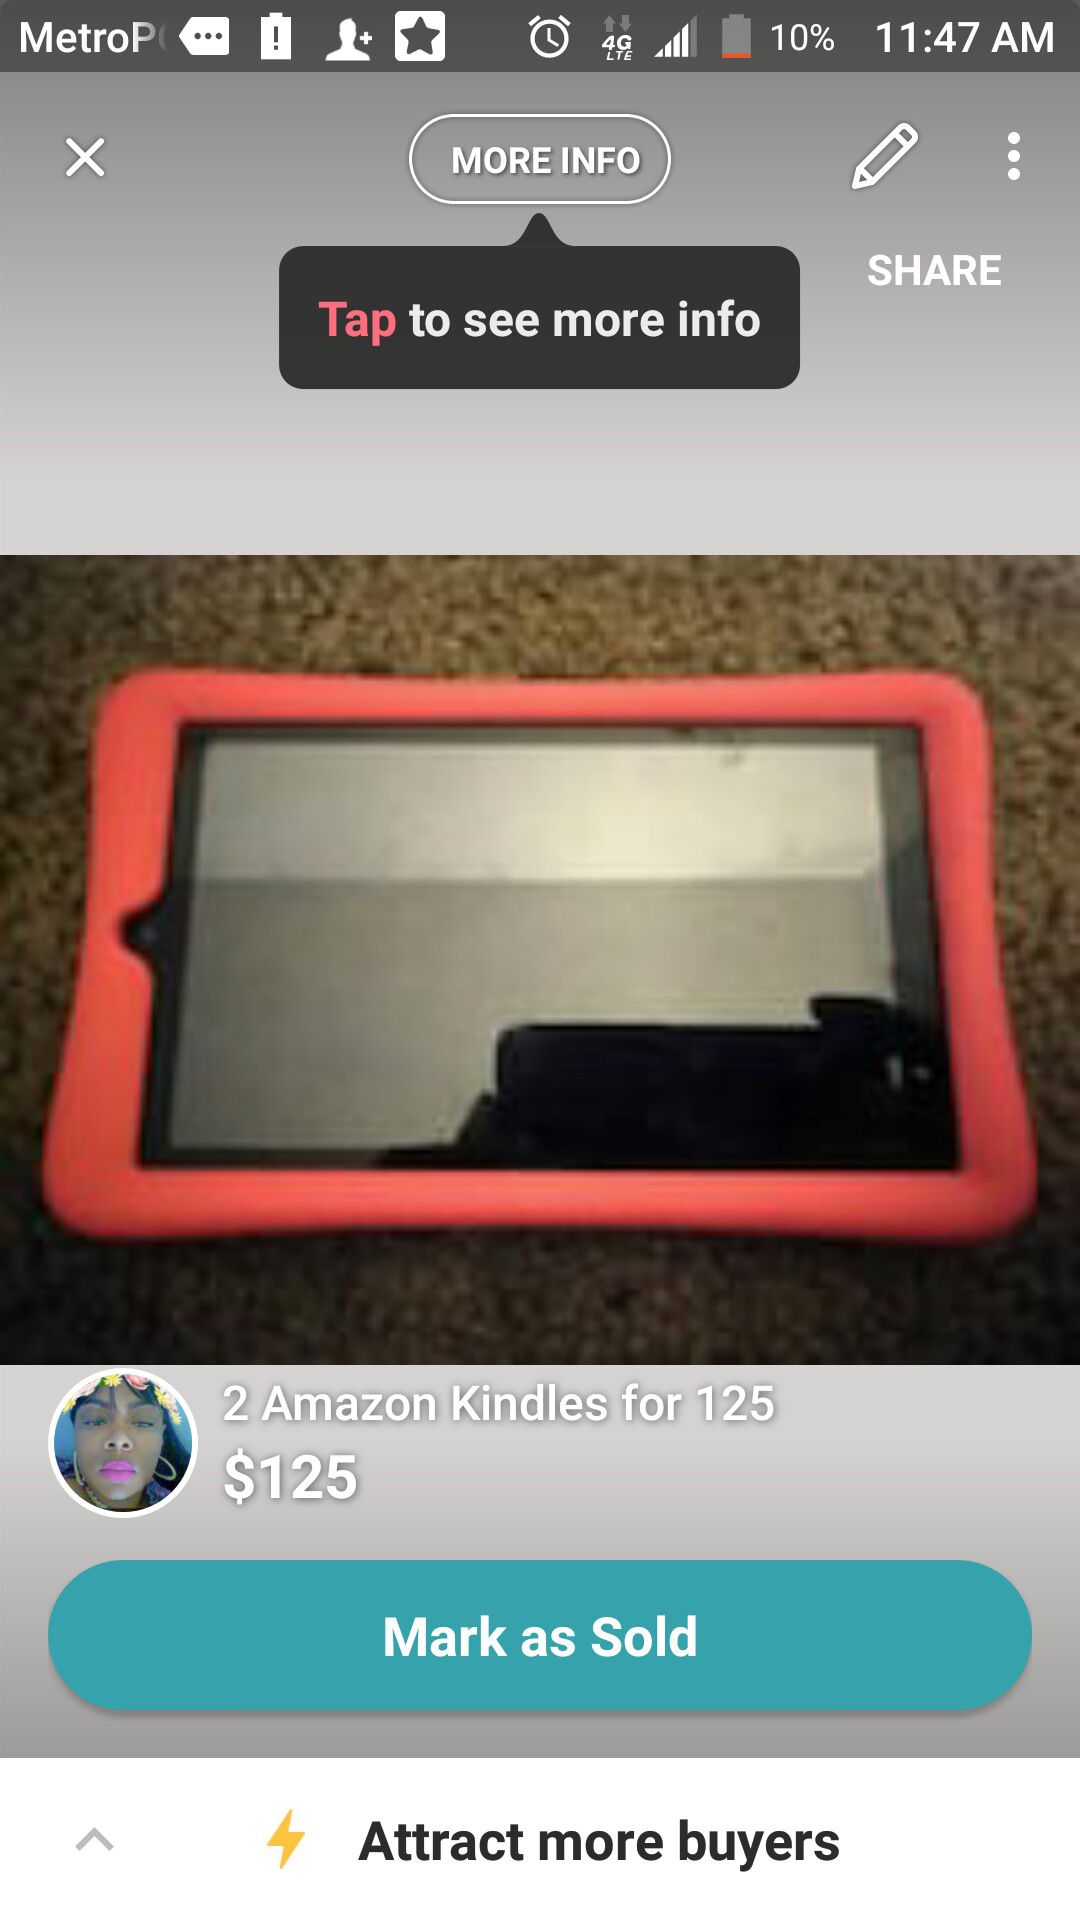 2 Amazon Kindles for $125 or 75 each